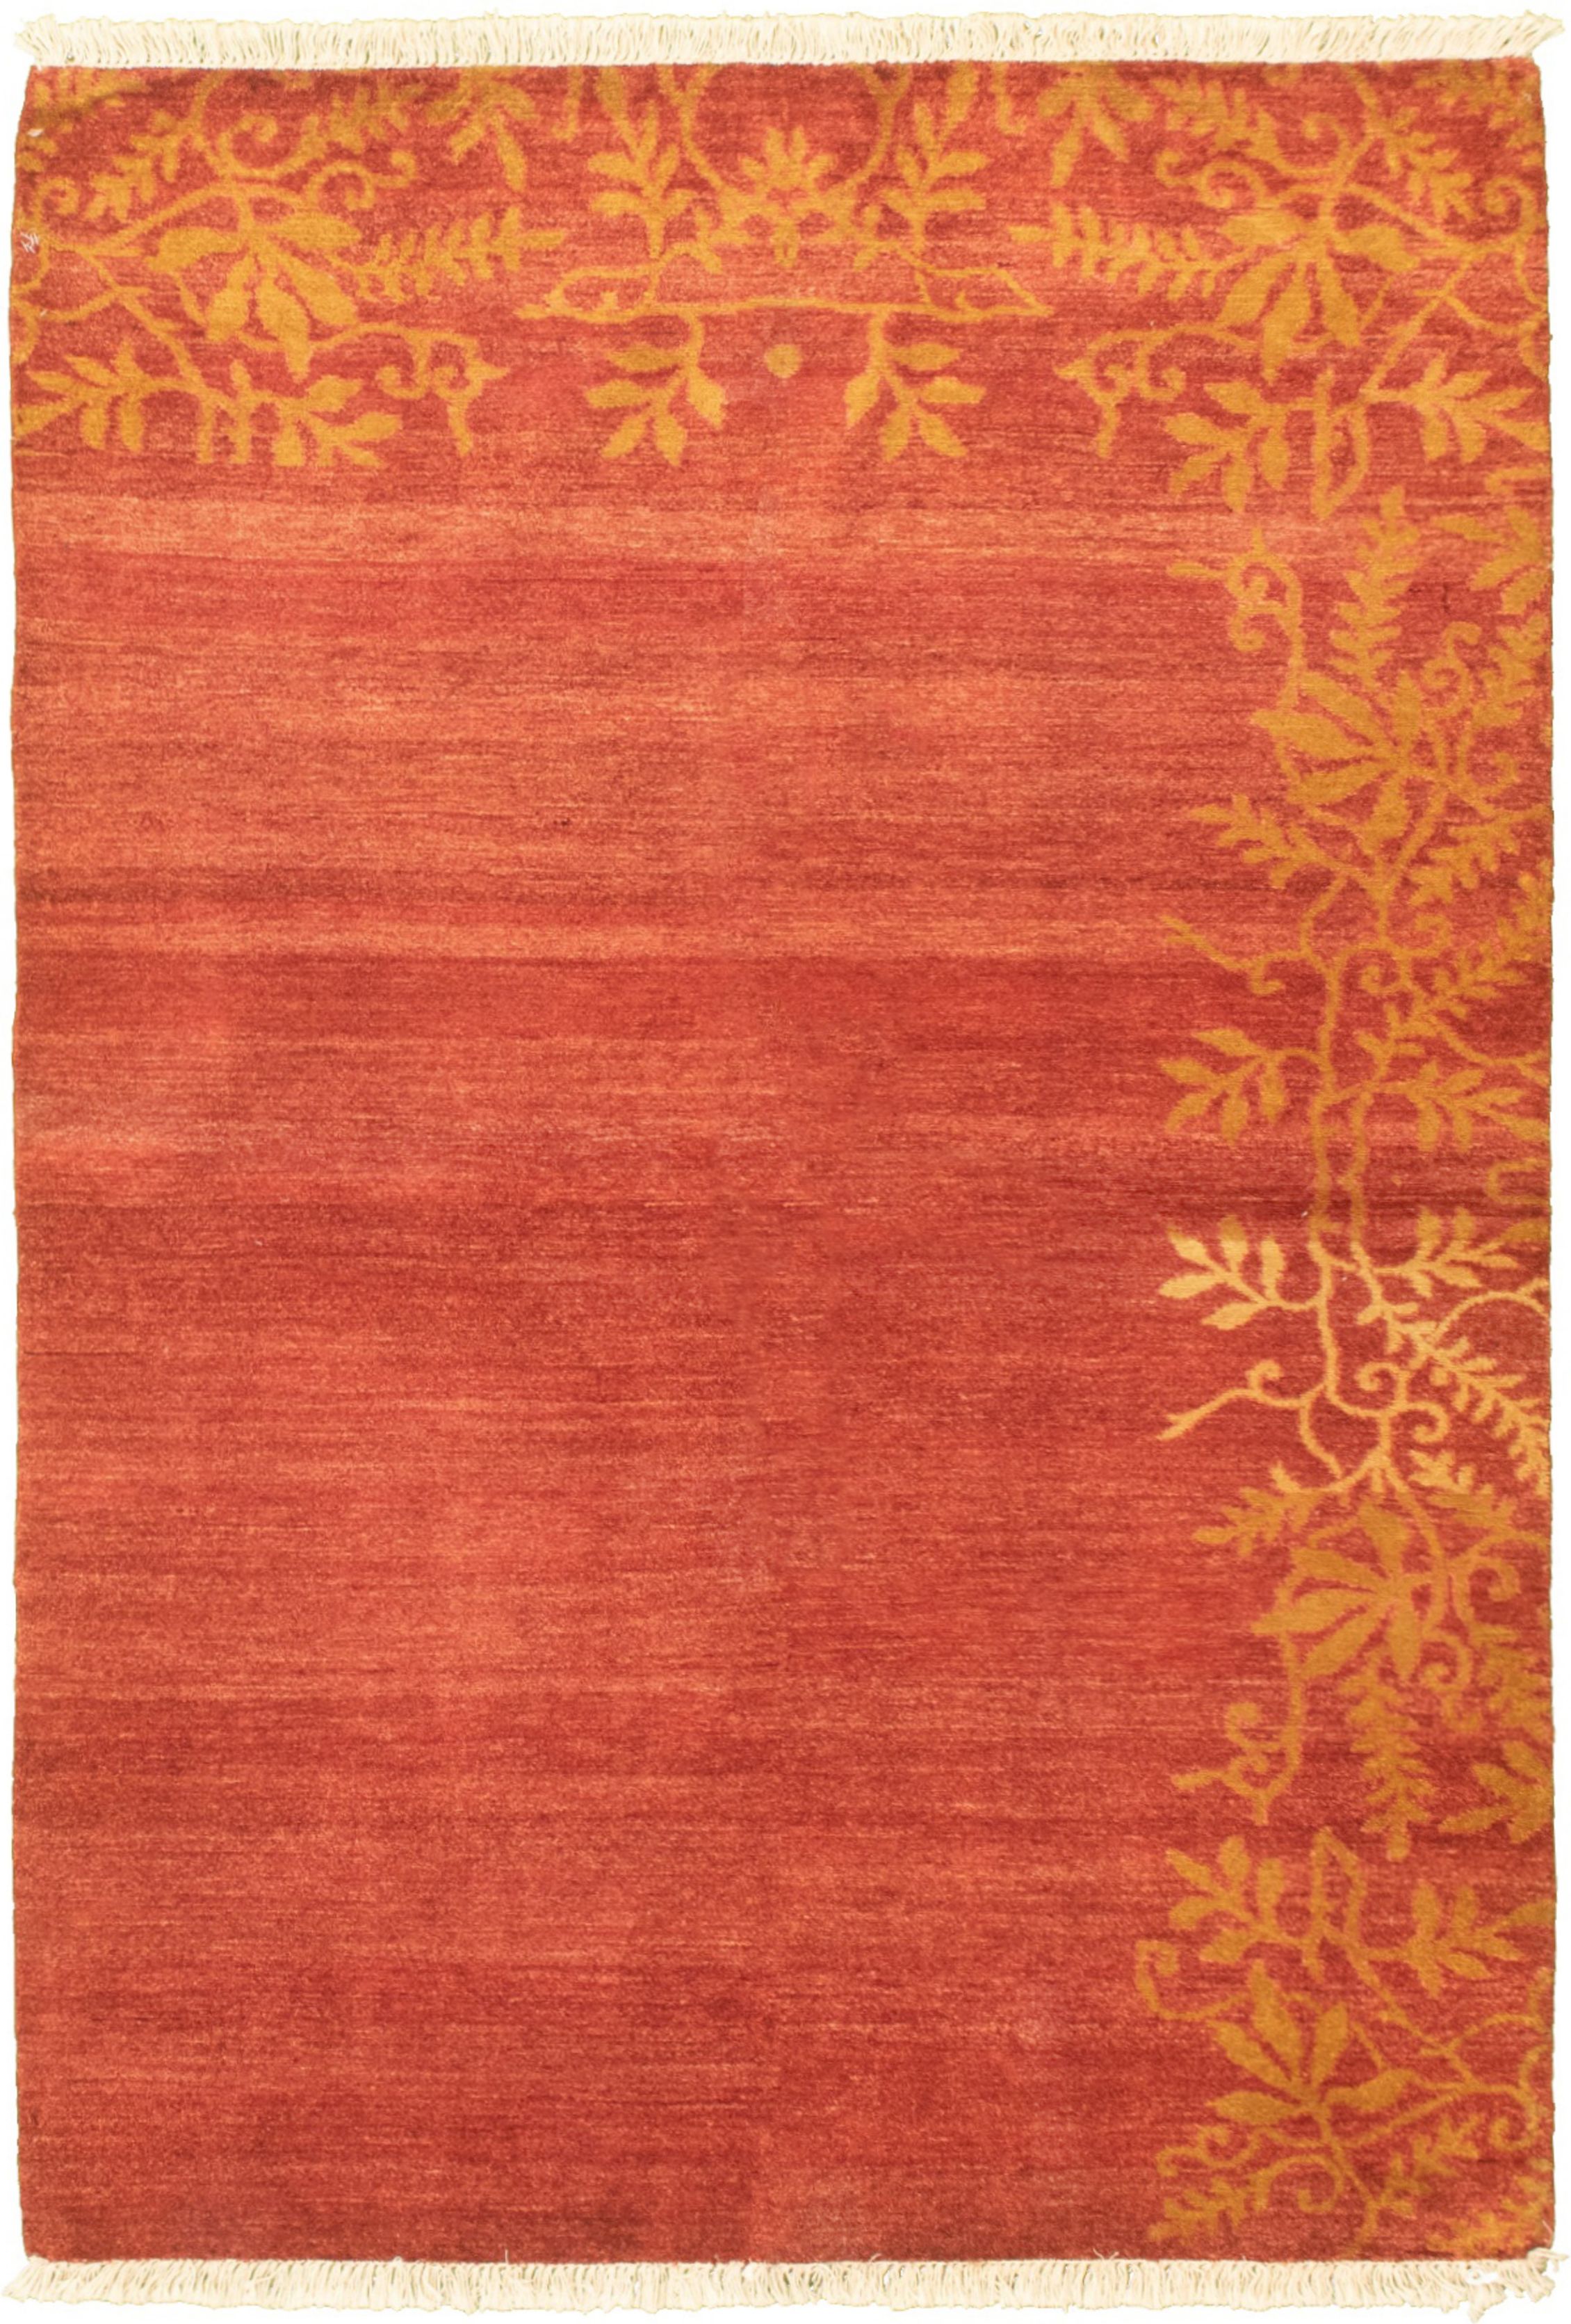 Hand-knotted Peshawar Ziegler Red Wool Rug 4'3" x 6'3" Size: 4'3" x 6'3"  